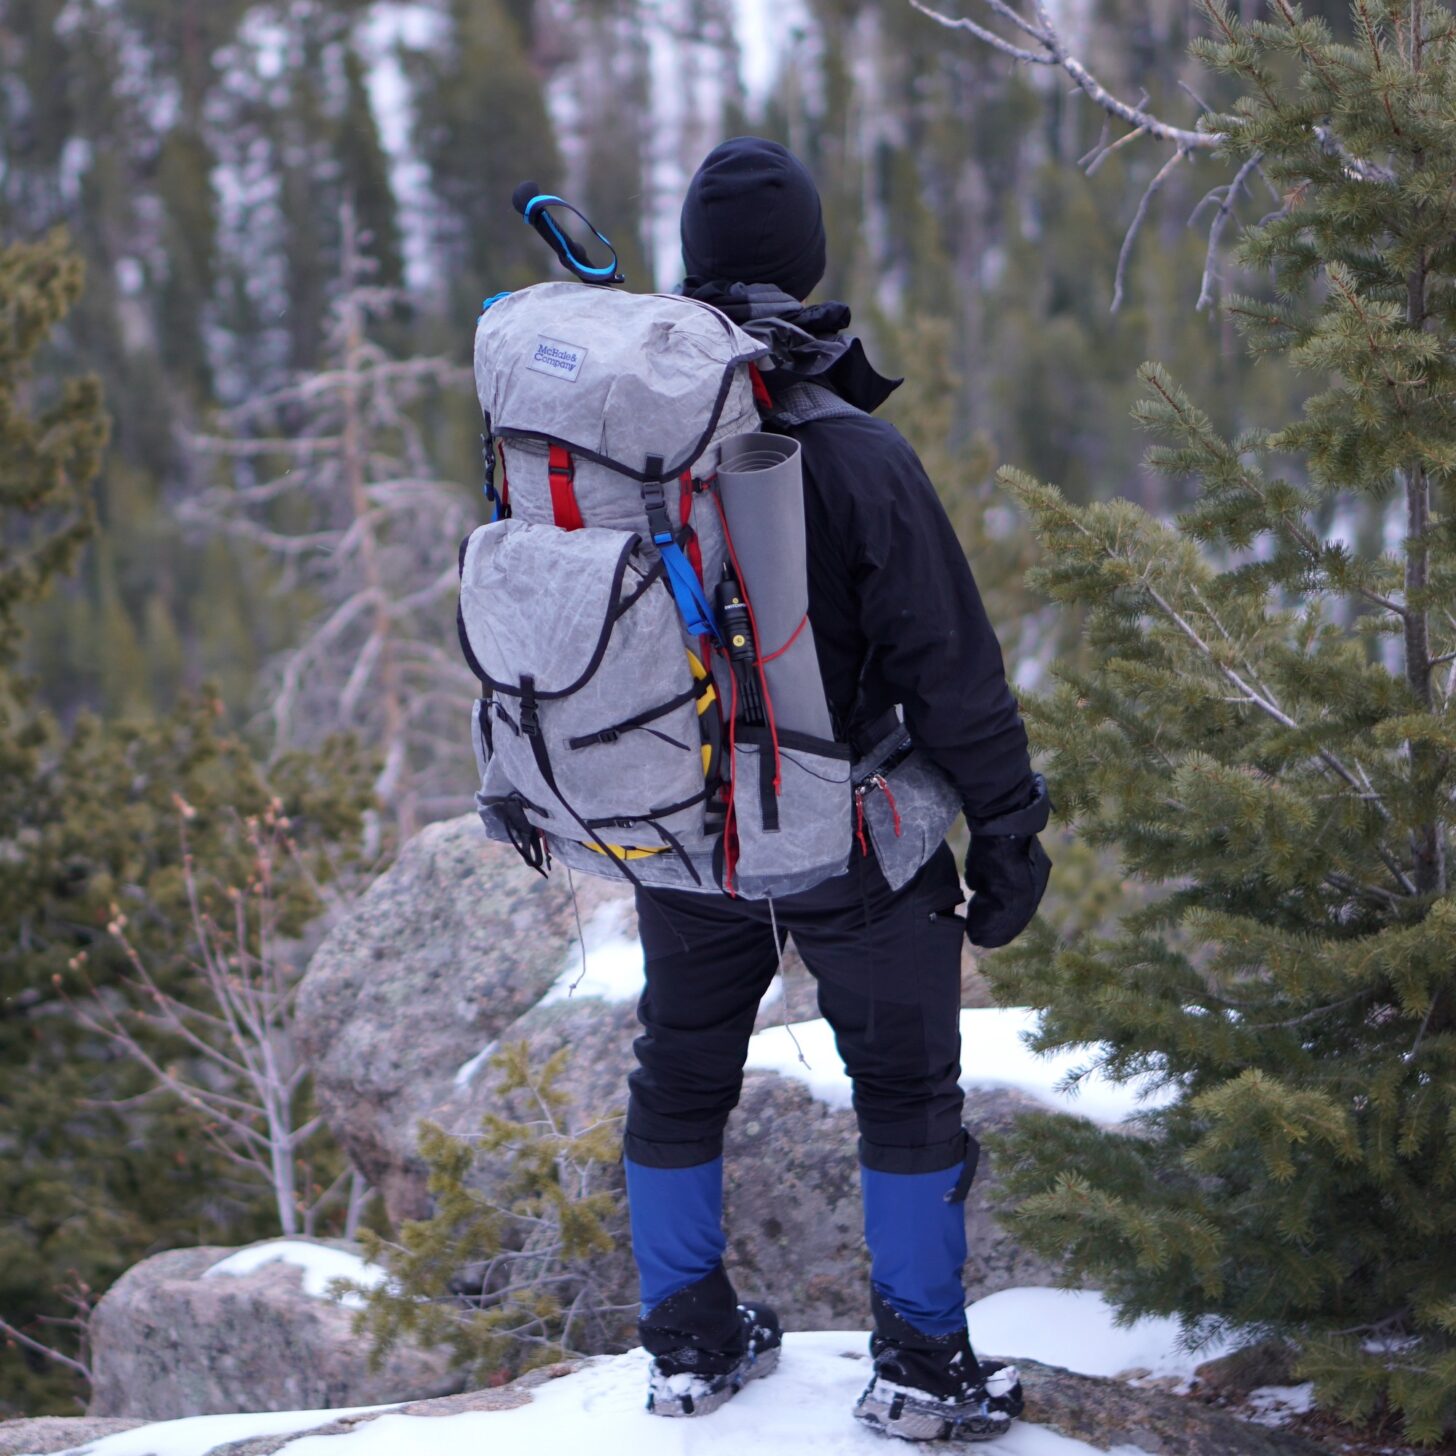 man standing, wearing a backpack on a snowy hill in the forest during the winter